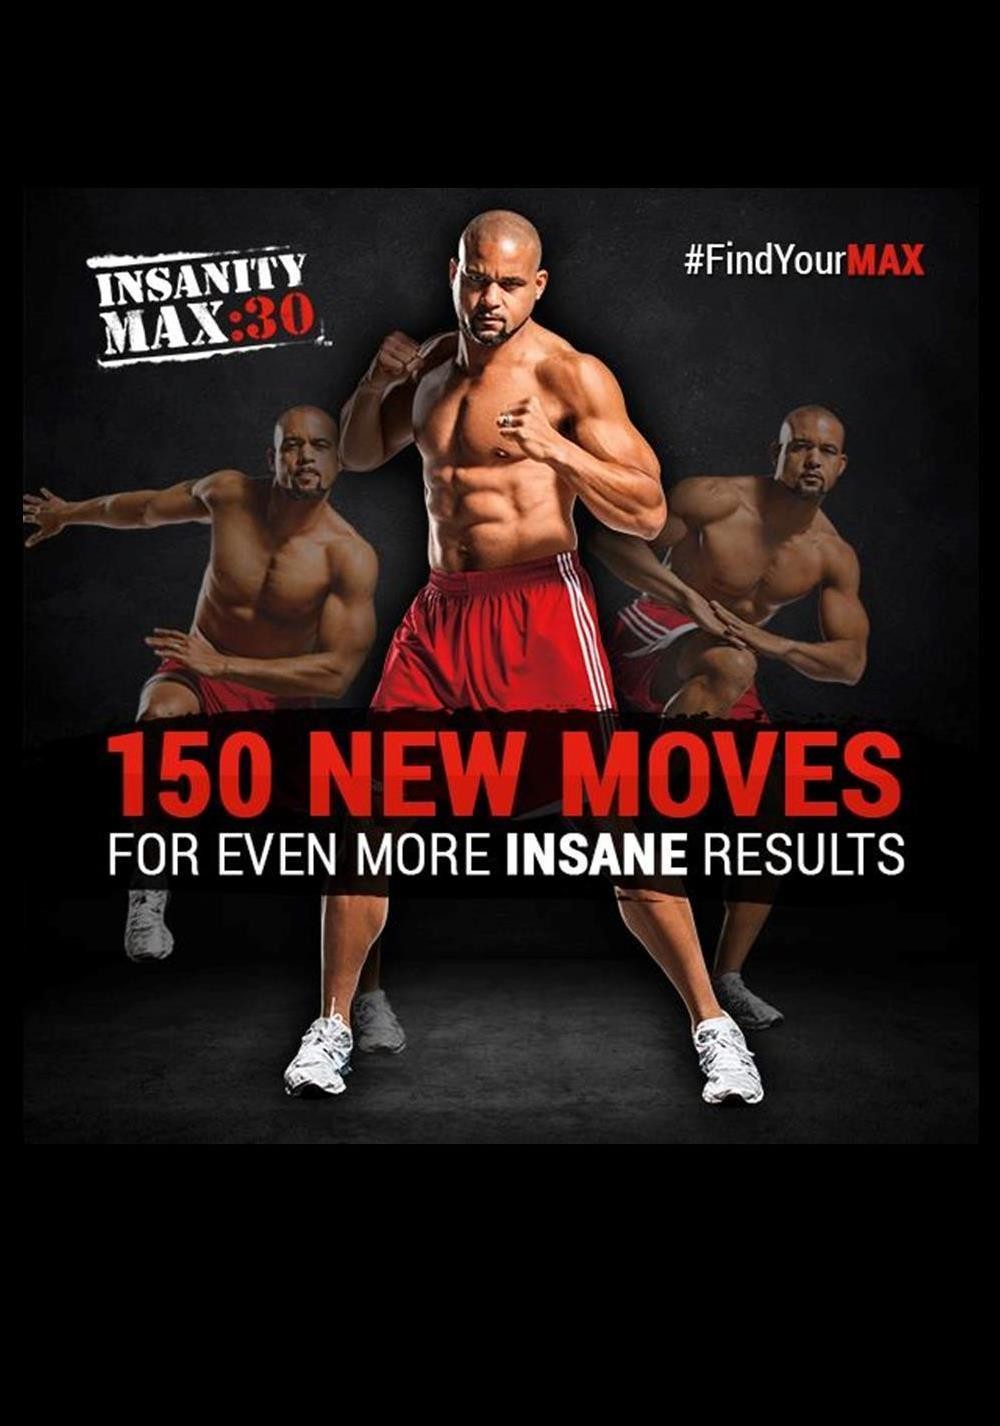 Insanity Max 30 online, free download